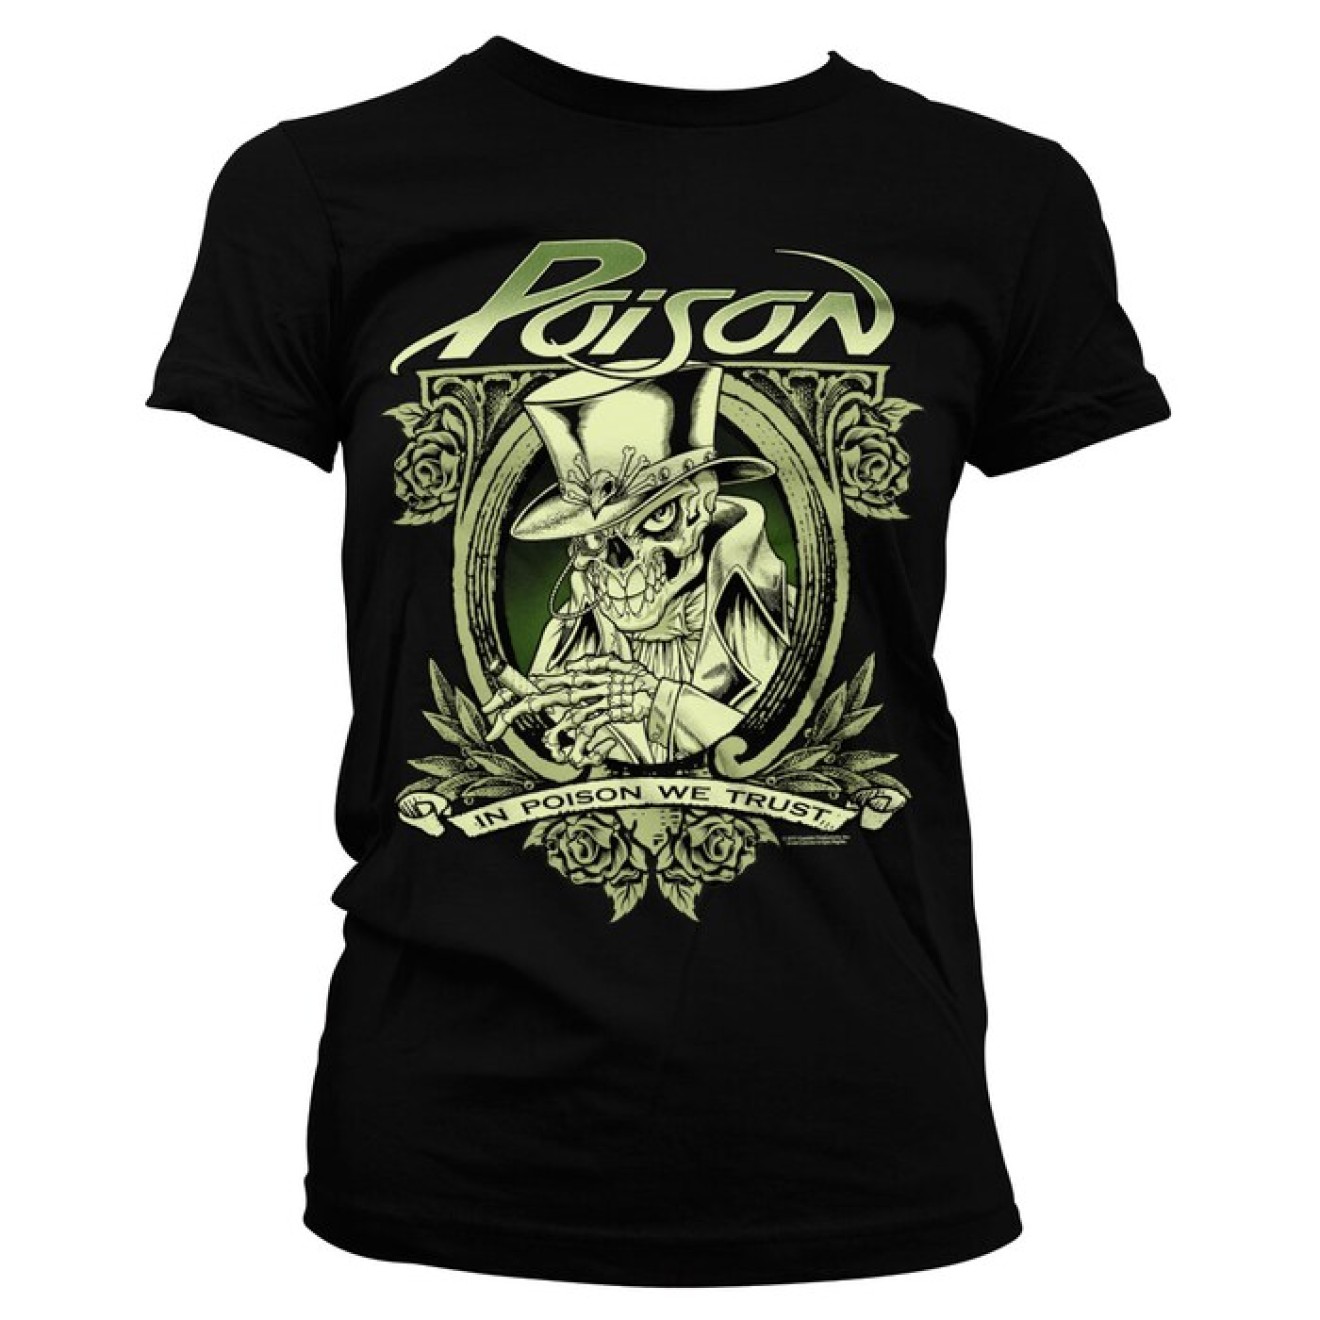 In Poison We Trust Girly Tee T-Shirt